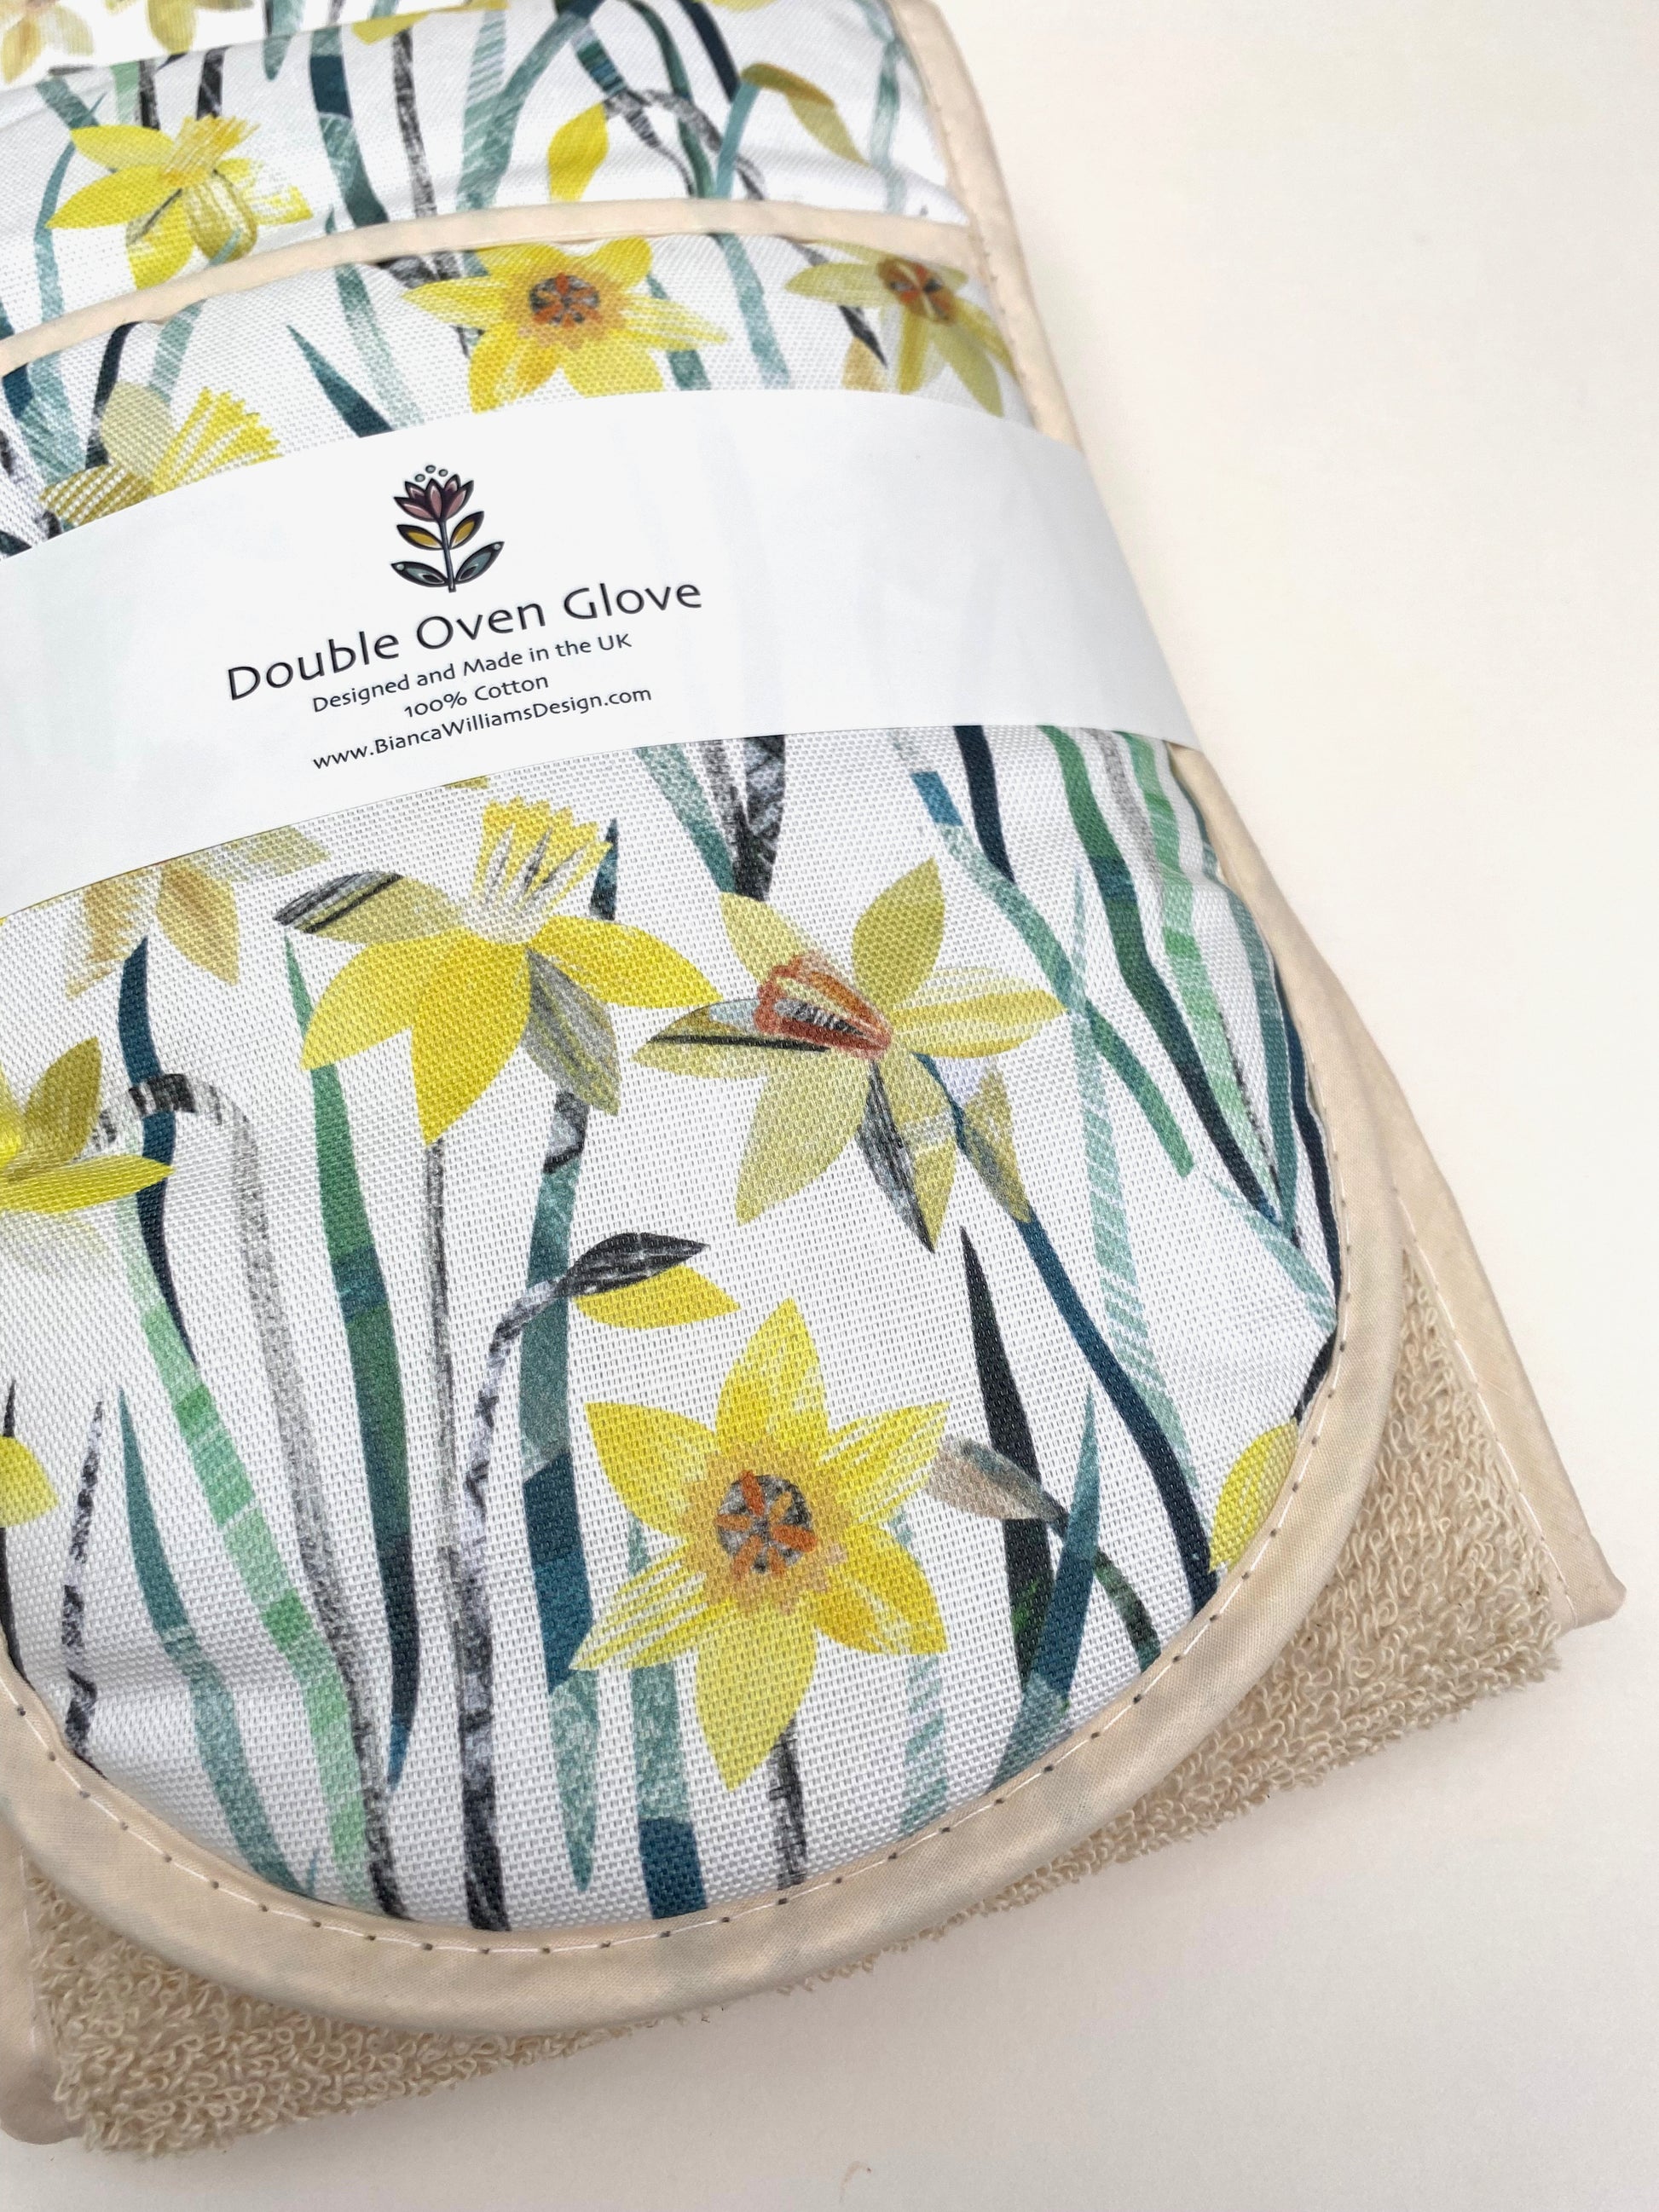 Close up of the daffodil Ovengloves, shows some of the lovely textured details of the pattern and Green and yellow colours as well as the lightly textured fabric.